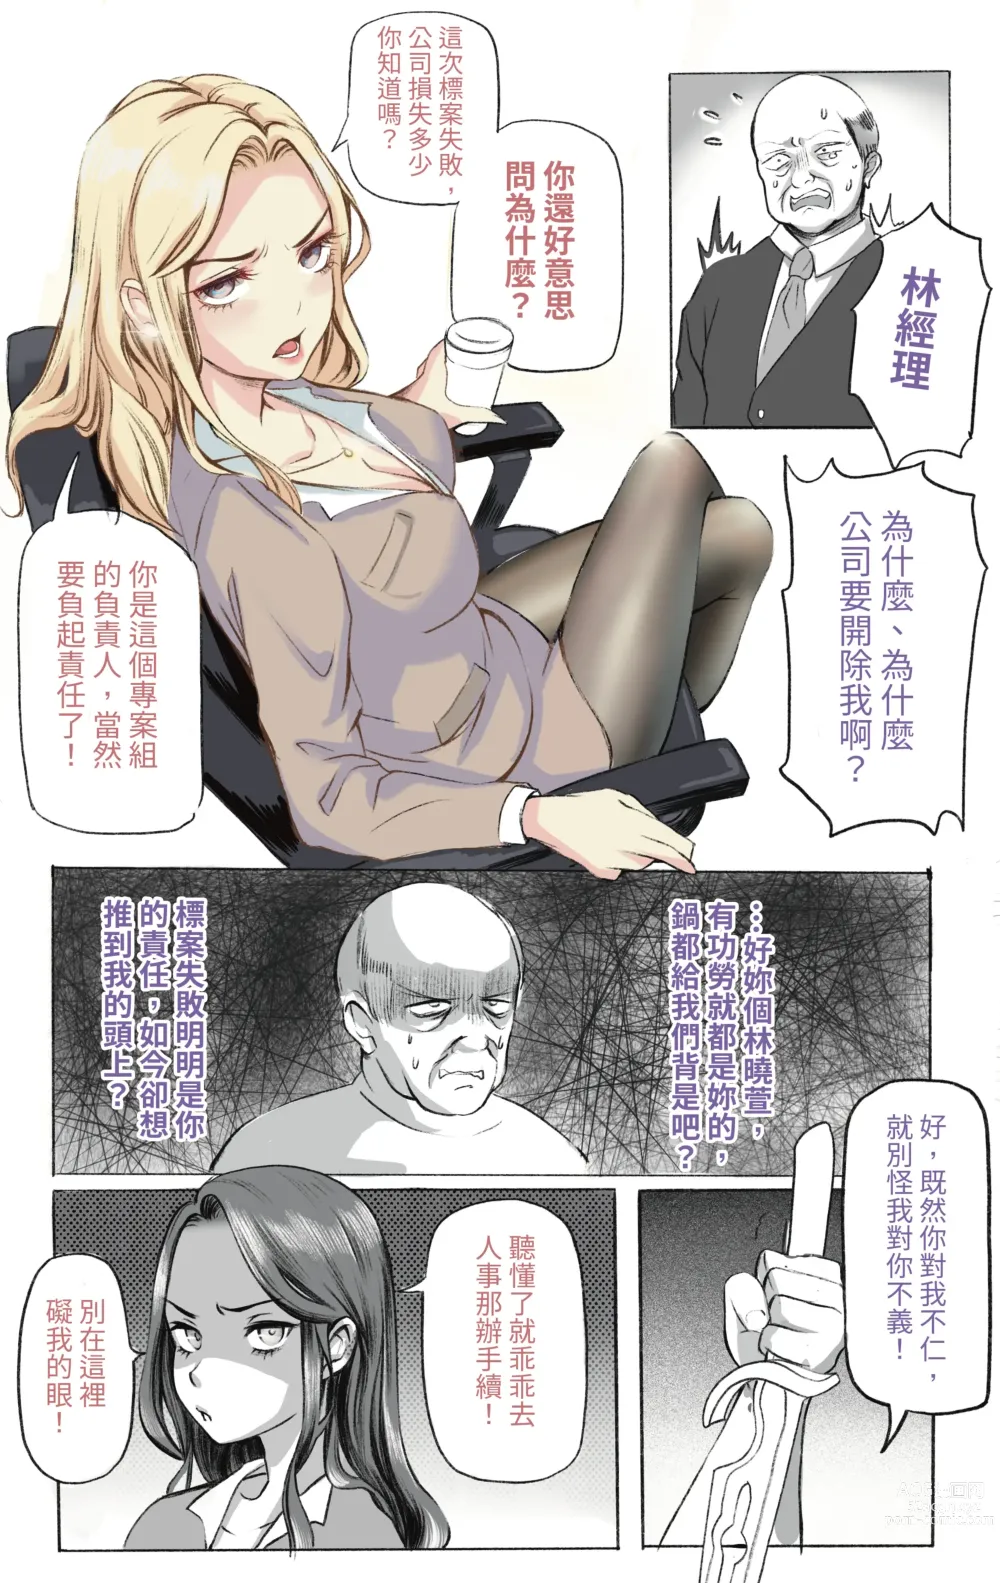 Page 1 of doujinshi 主管的秘密